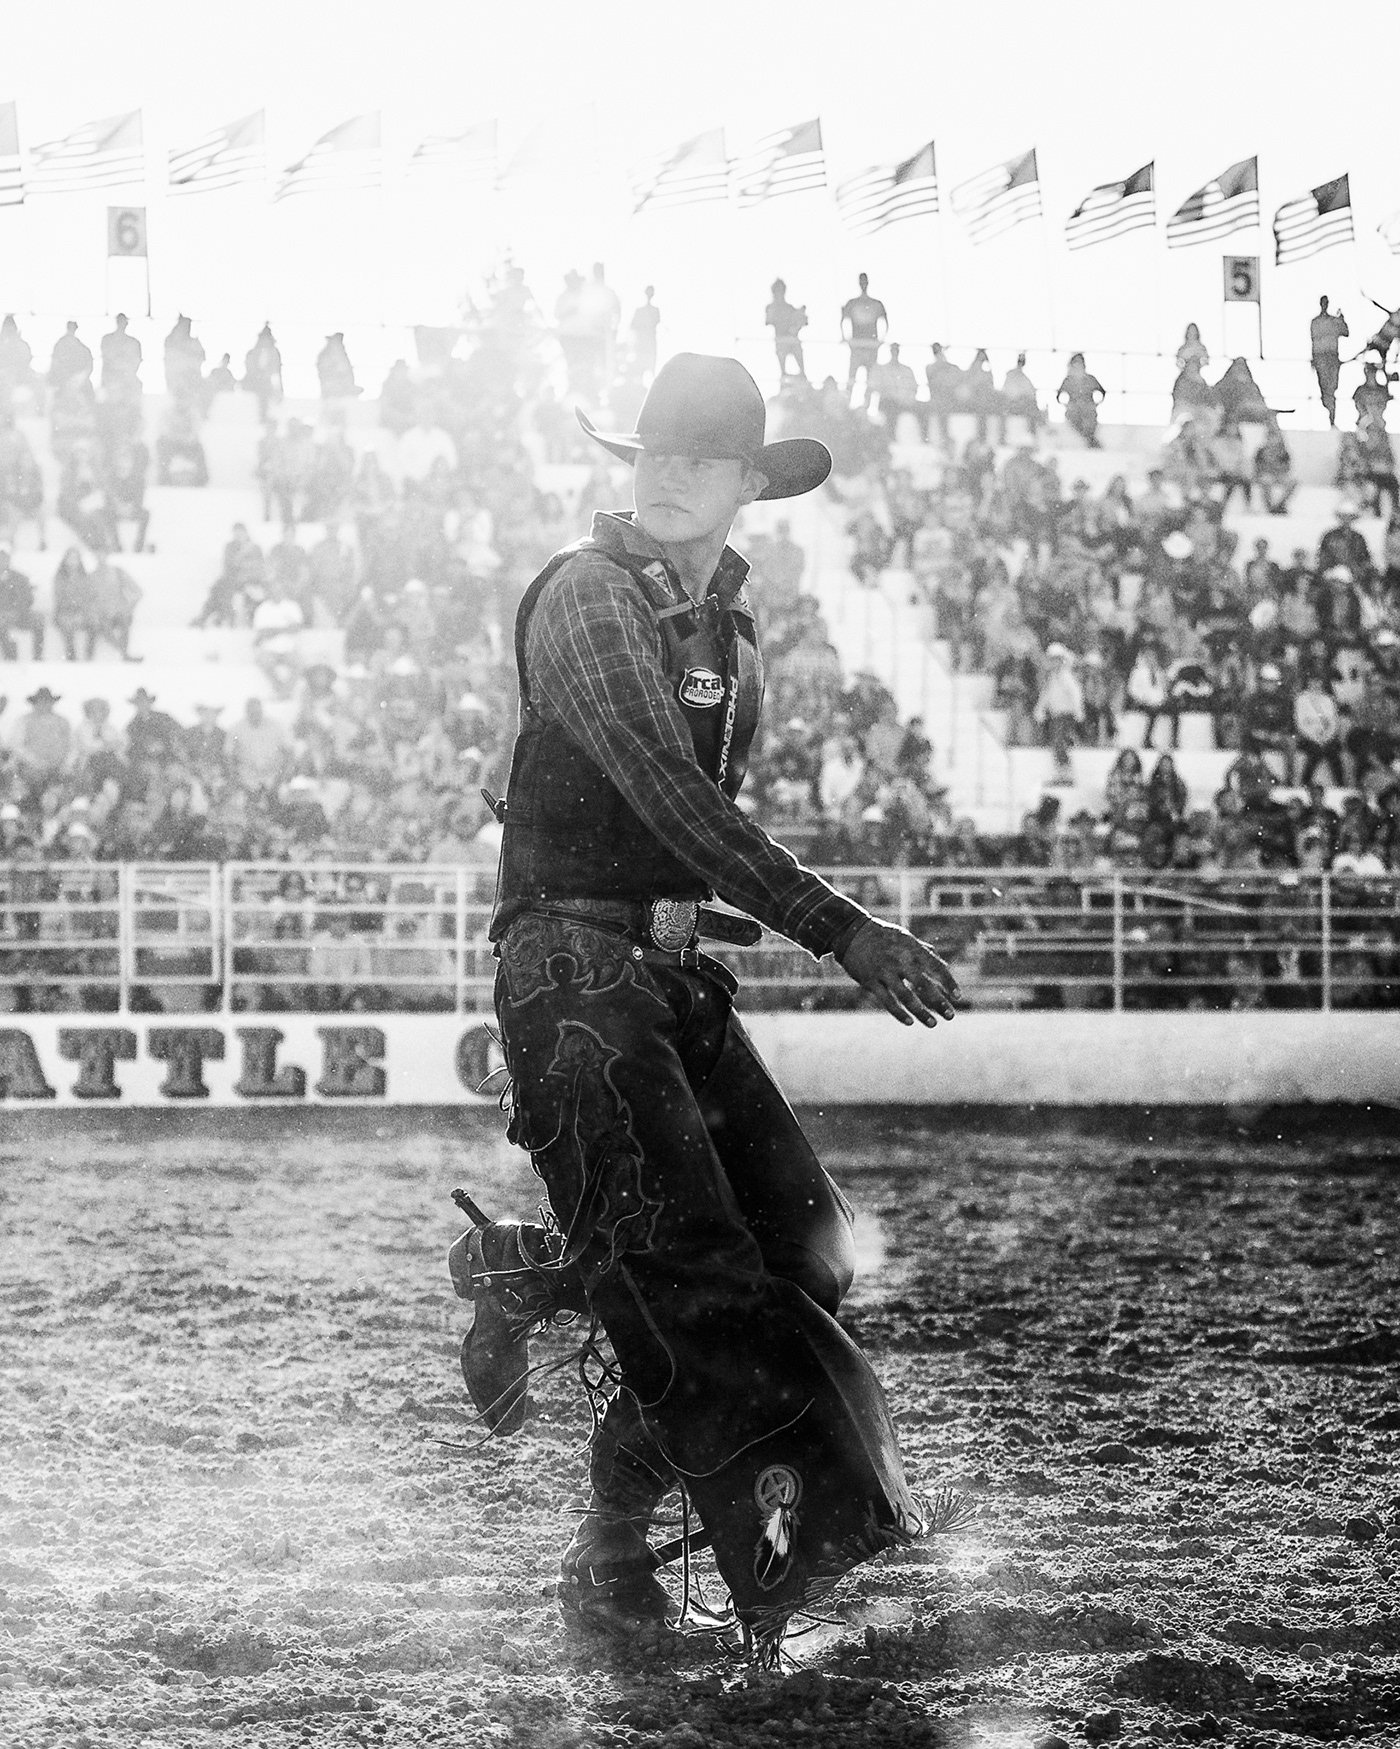 rodeo cowboy cowgirl Bullrider horse Cattle flag Arena rodeo clown  bull